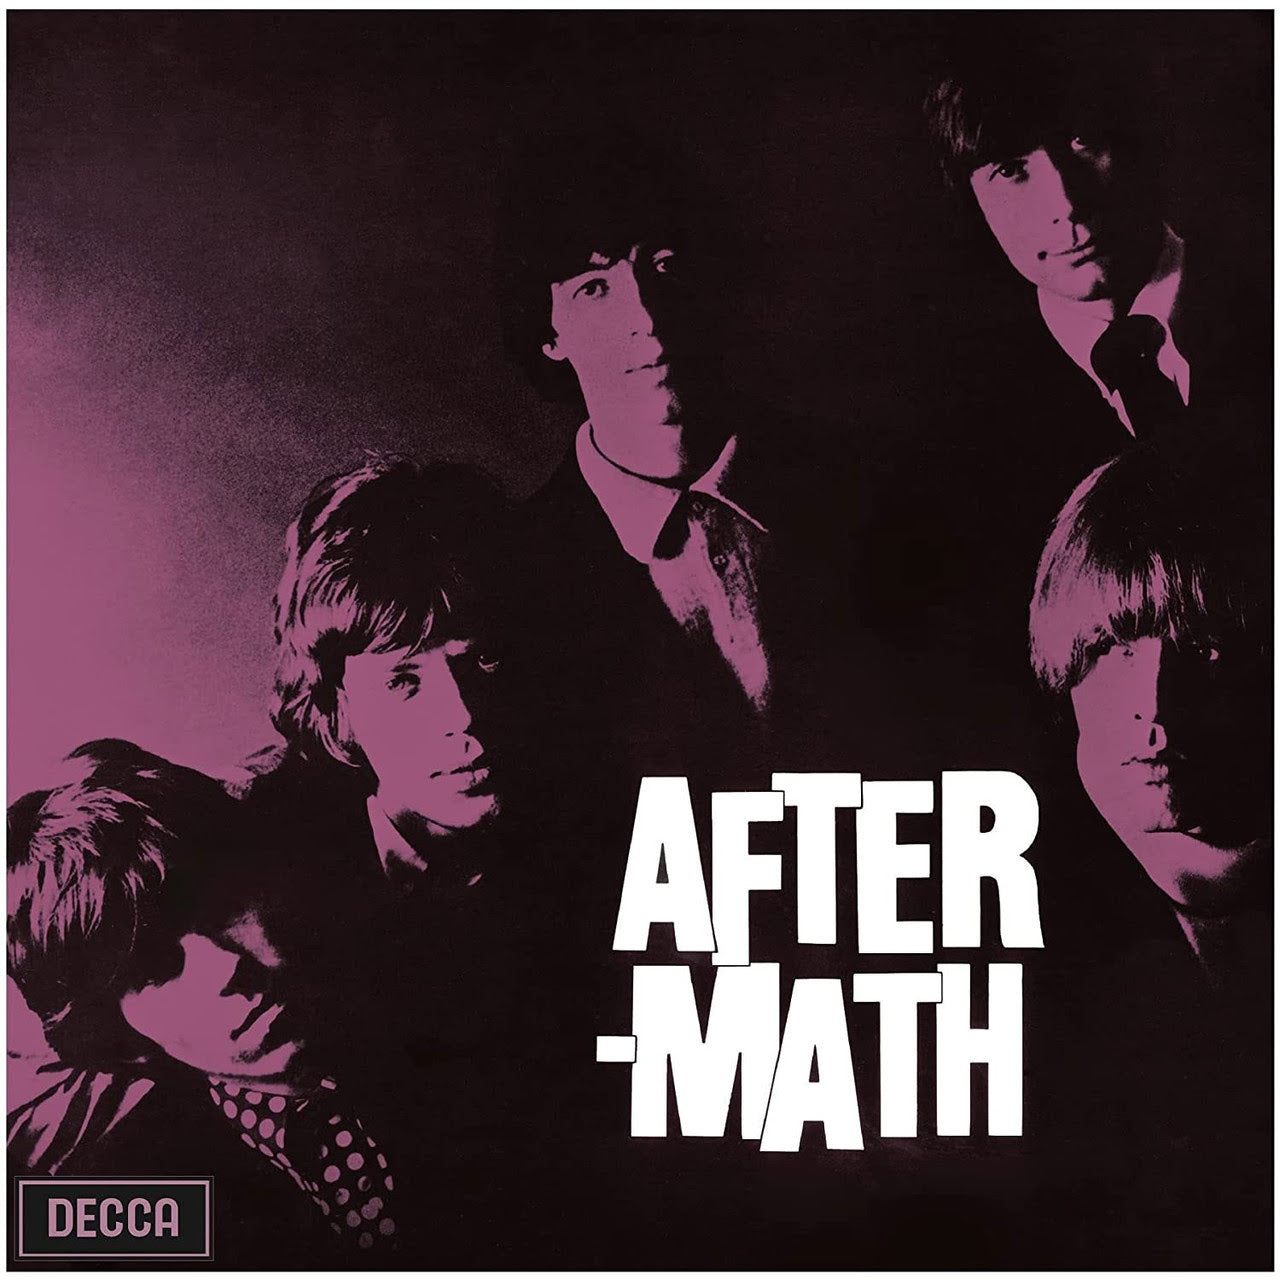 The Rolling Stones – Aftermath (UK Version) | Buy the Vinyl LP from Flying Nun Records